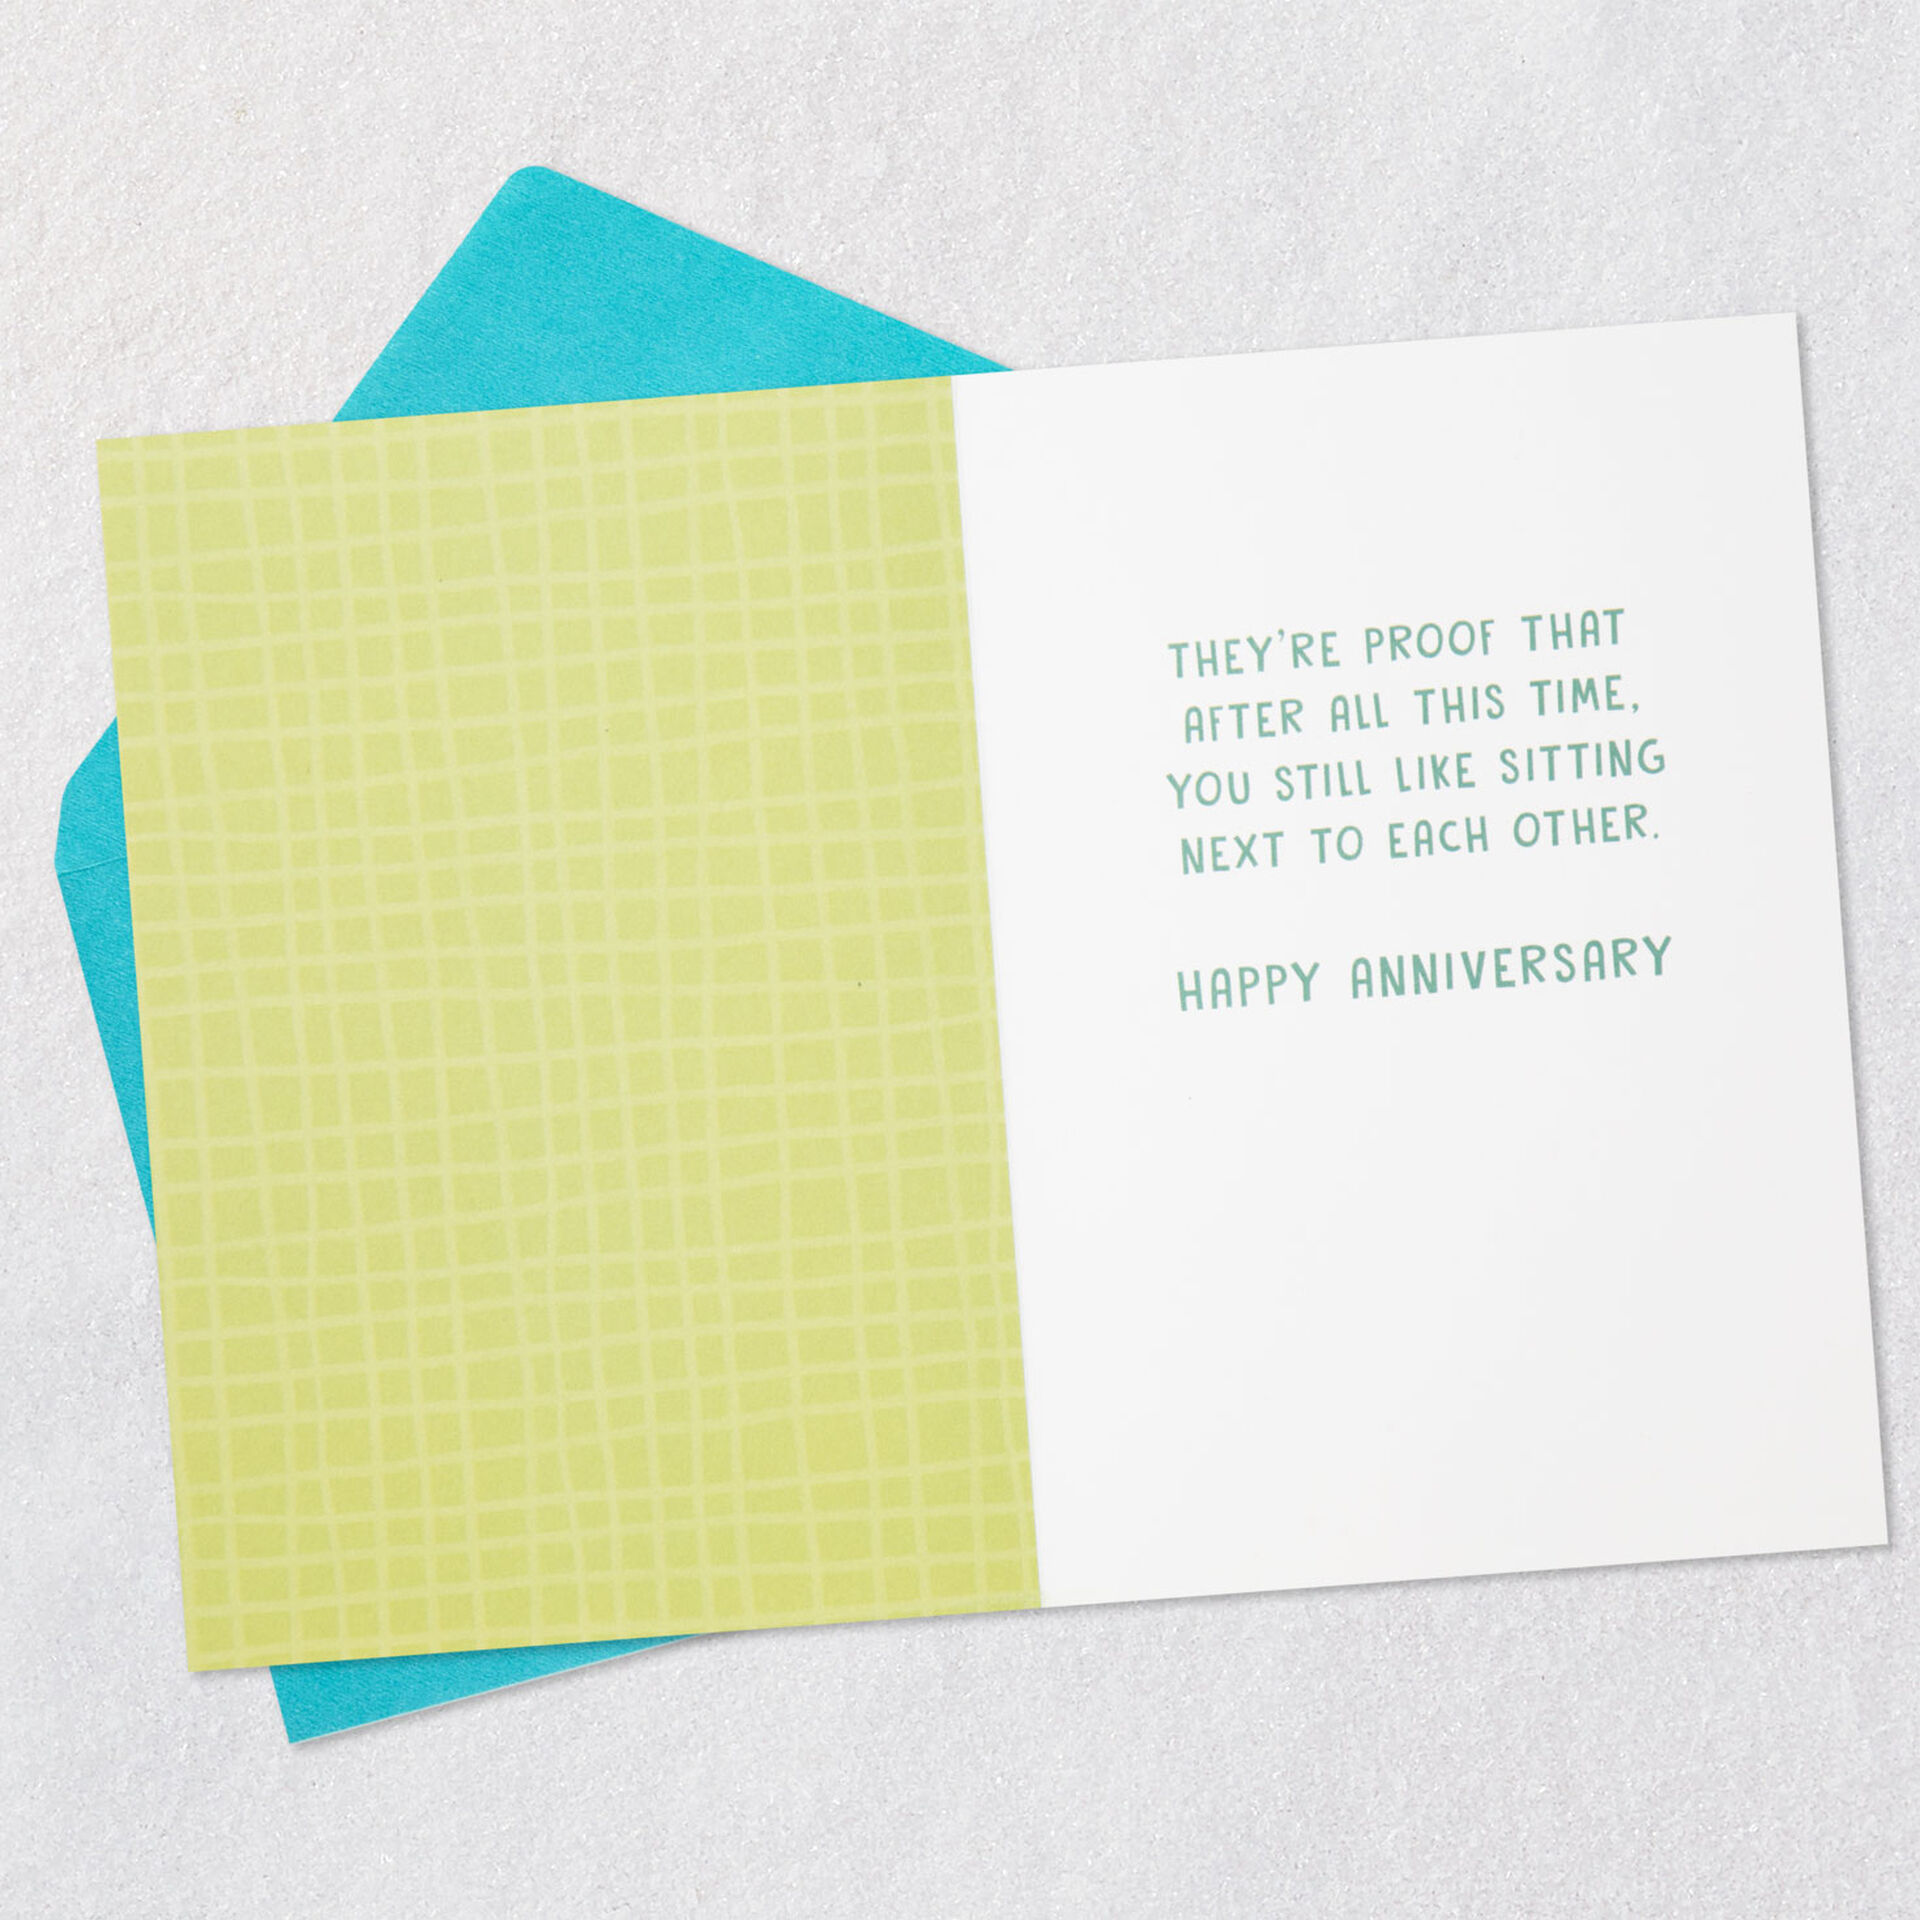 Butt-Dents-in-Sofa-Funny-Anniversary-Card-for-Couple_399ZZS6501_03